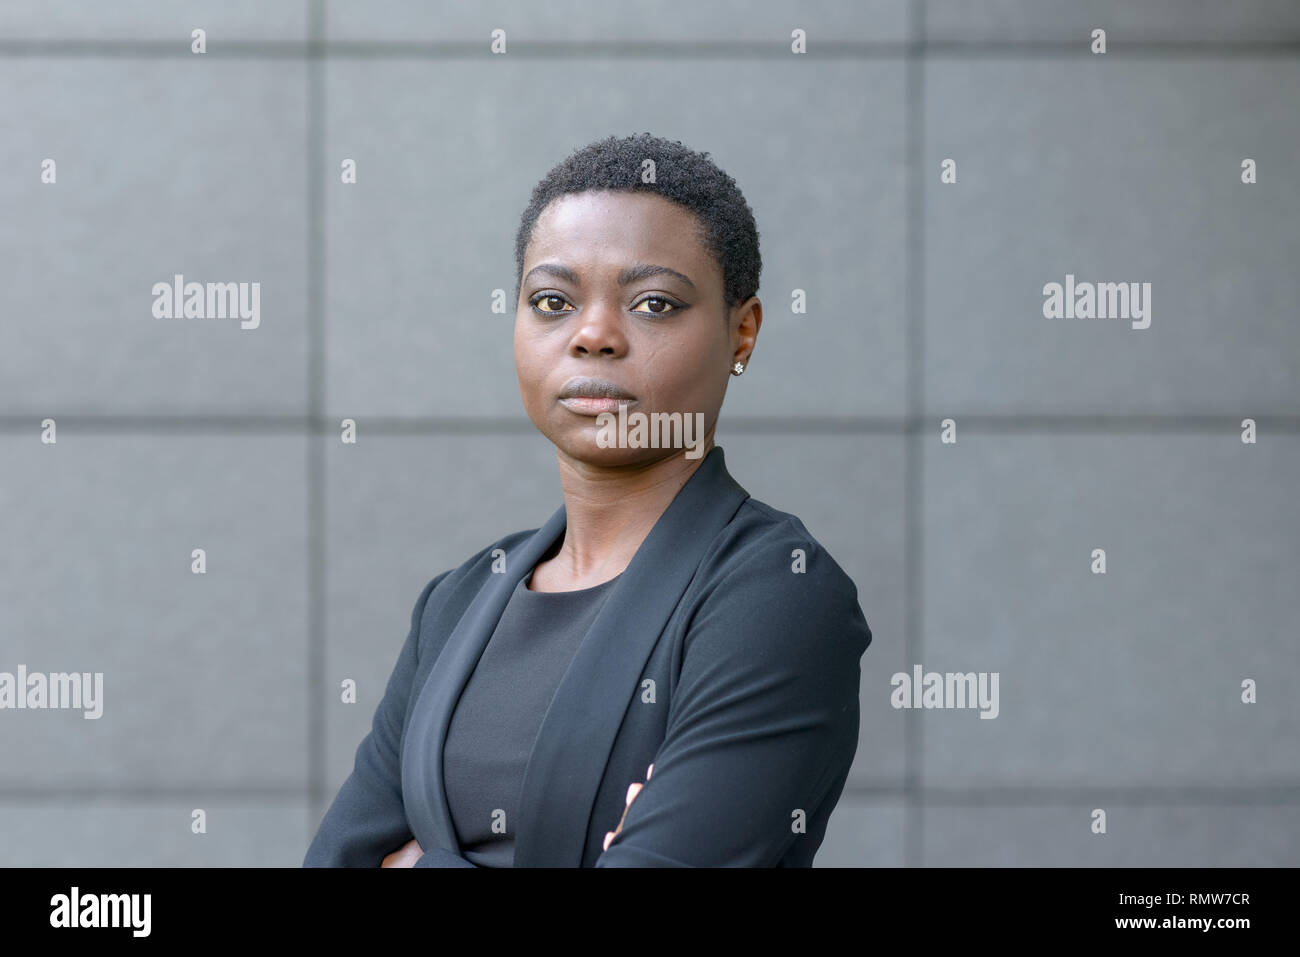 Emotionless Face High Resolution Stock Photography and Images - Alamy